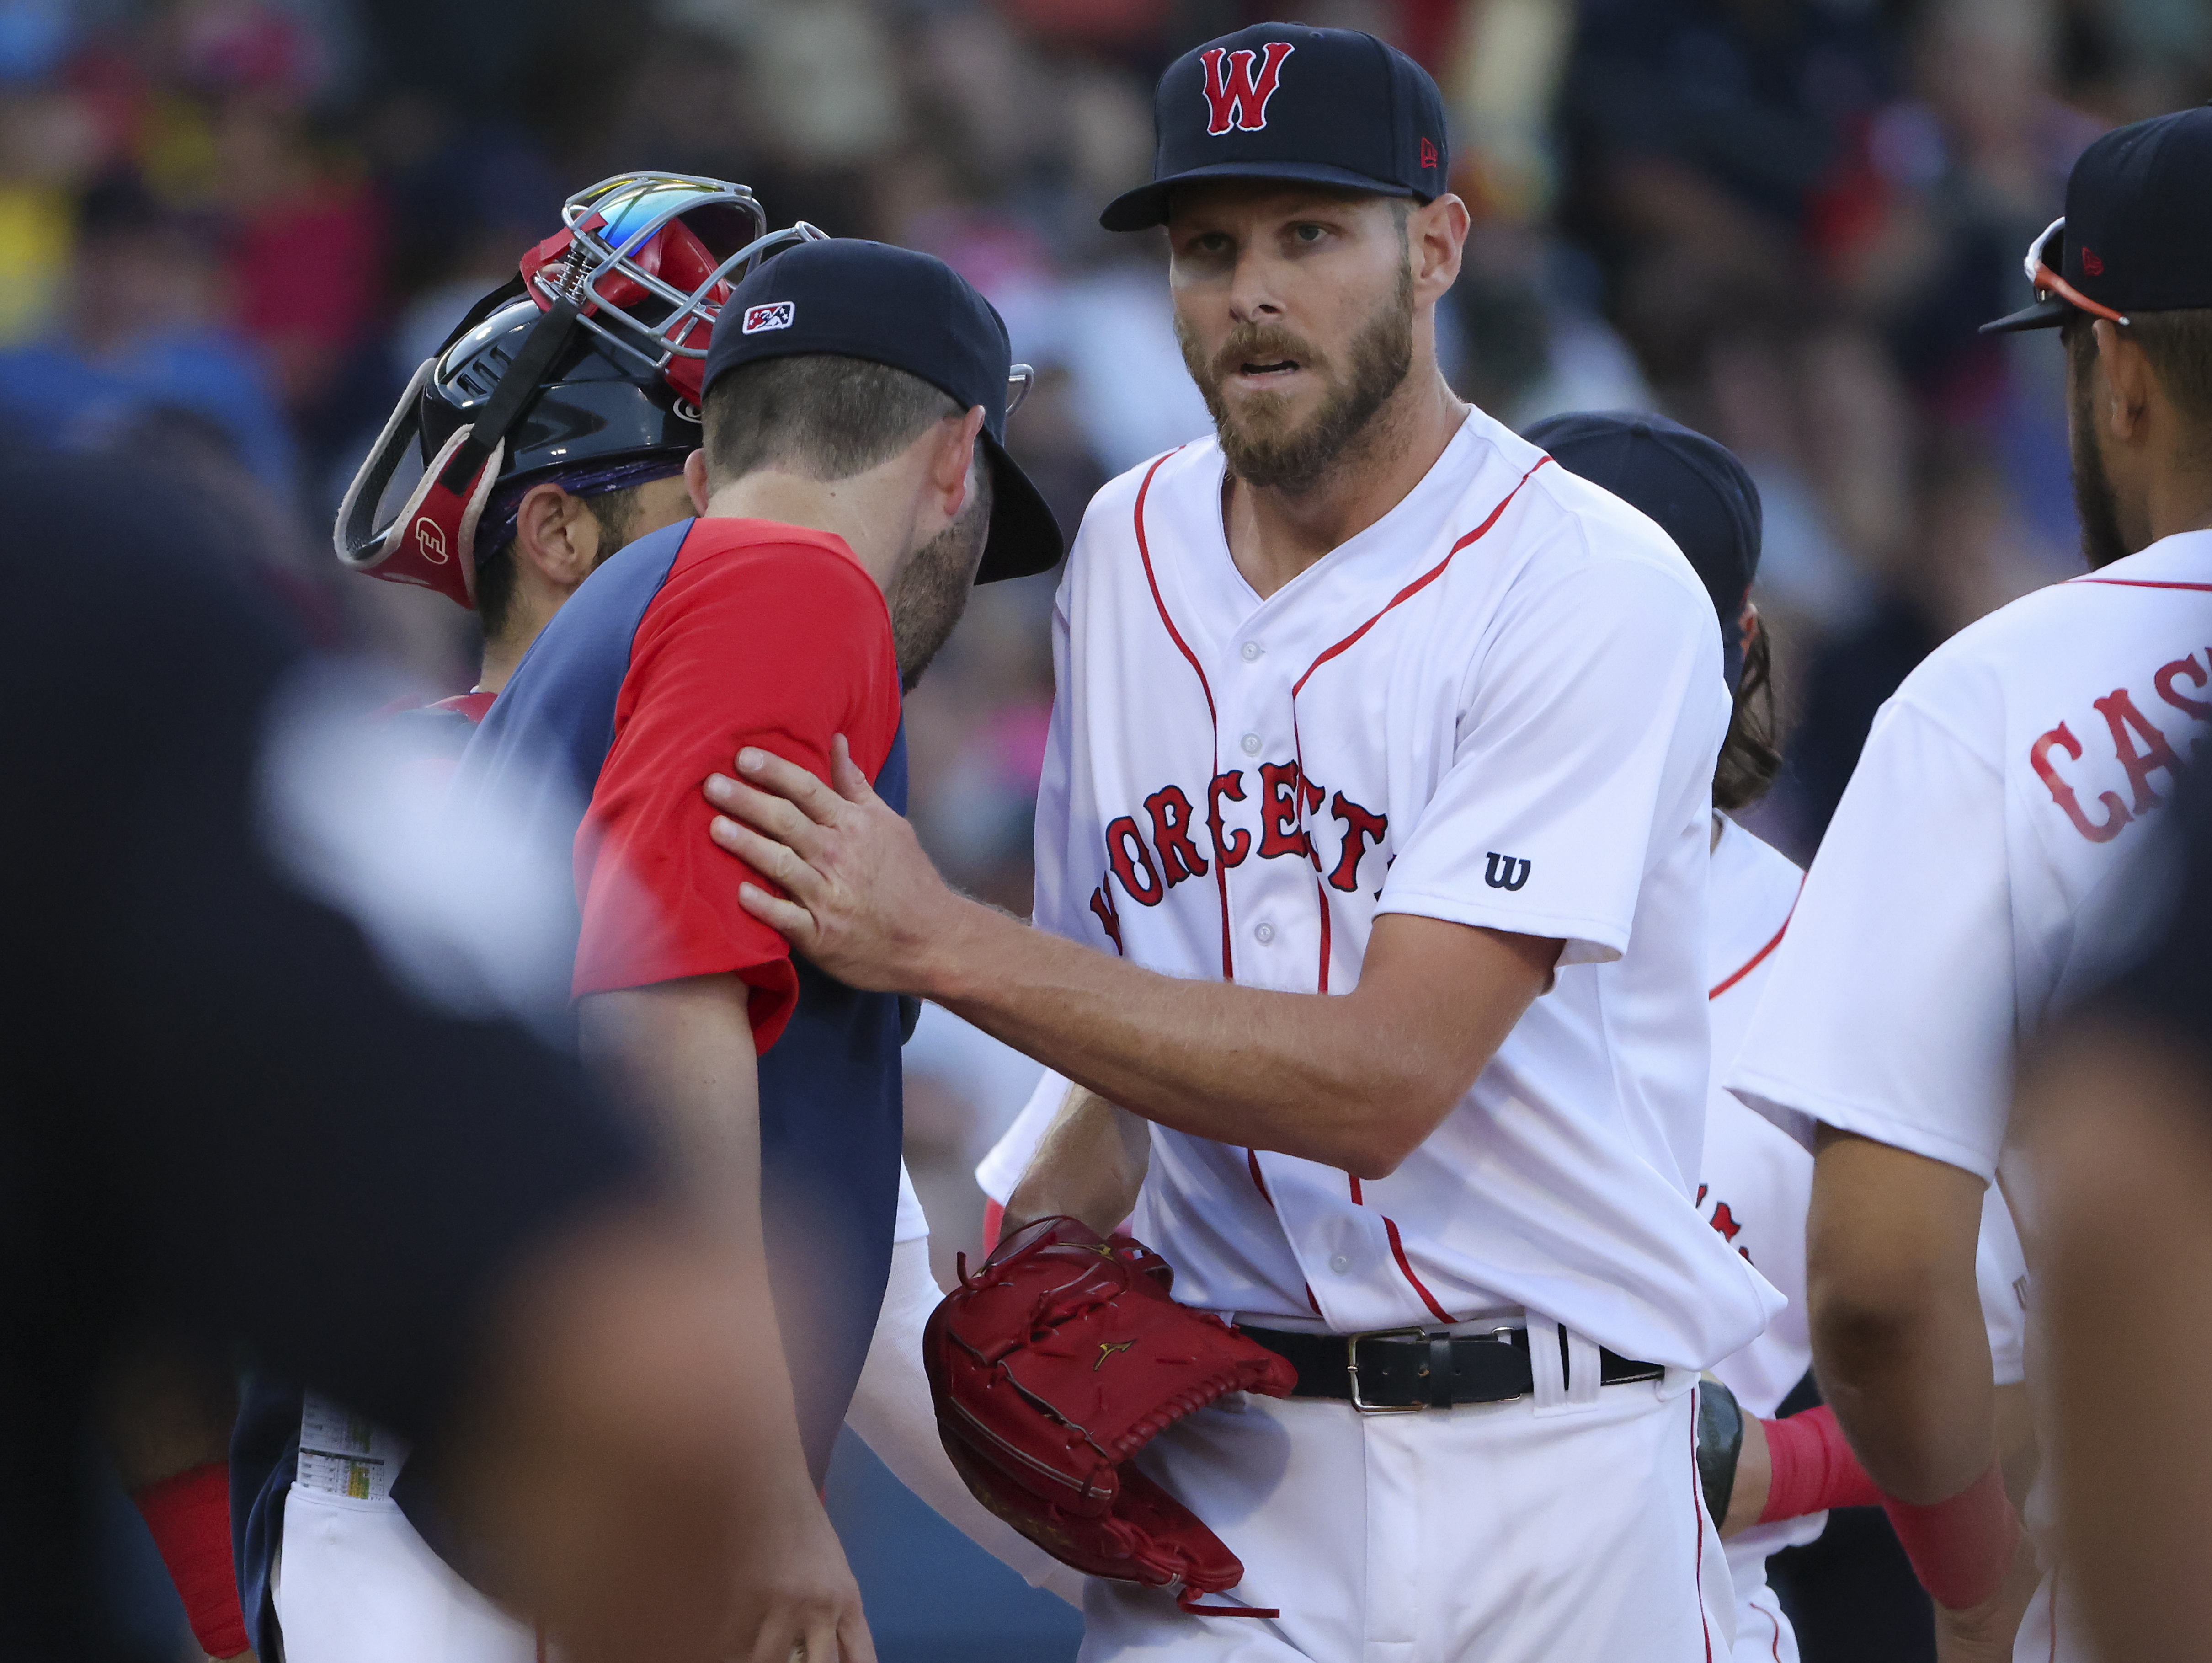 WooSox celebrate Juneteenth: Worcester Red Sox players glad team will honor  holiday marking end of slavery 